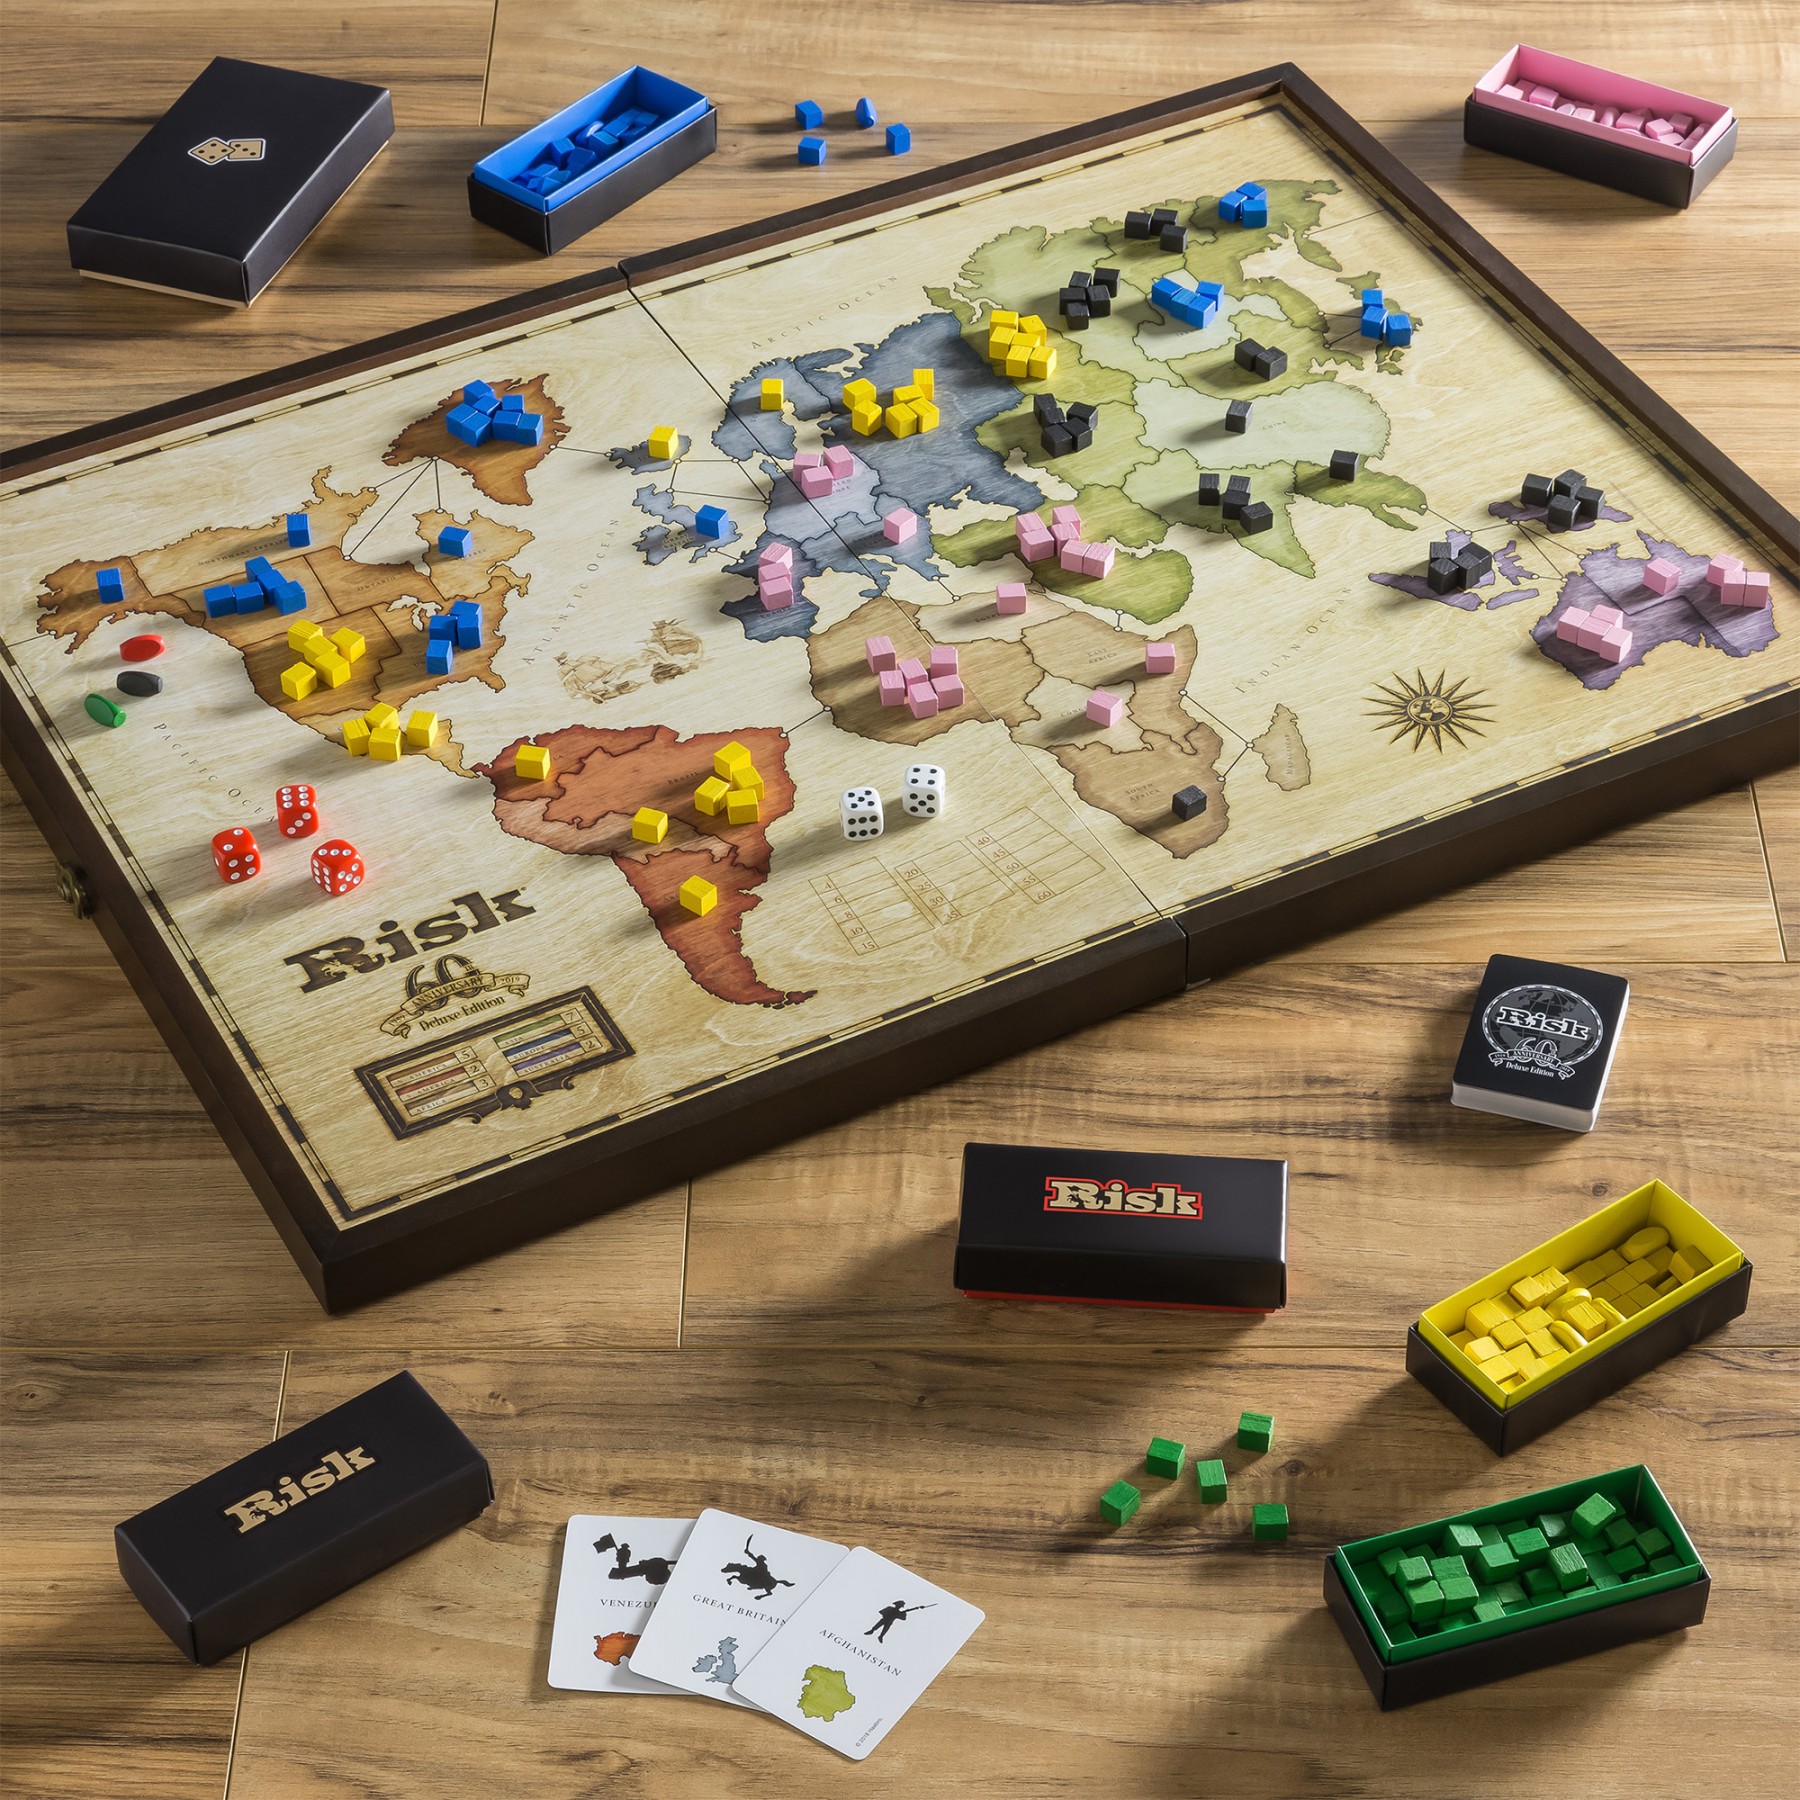 600+ Free Online Board Games to Play Right Now